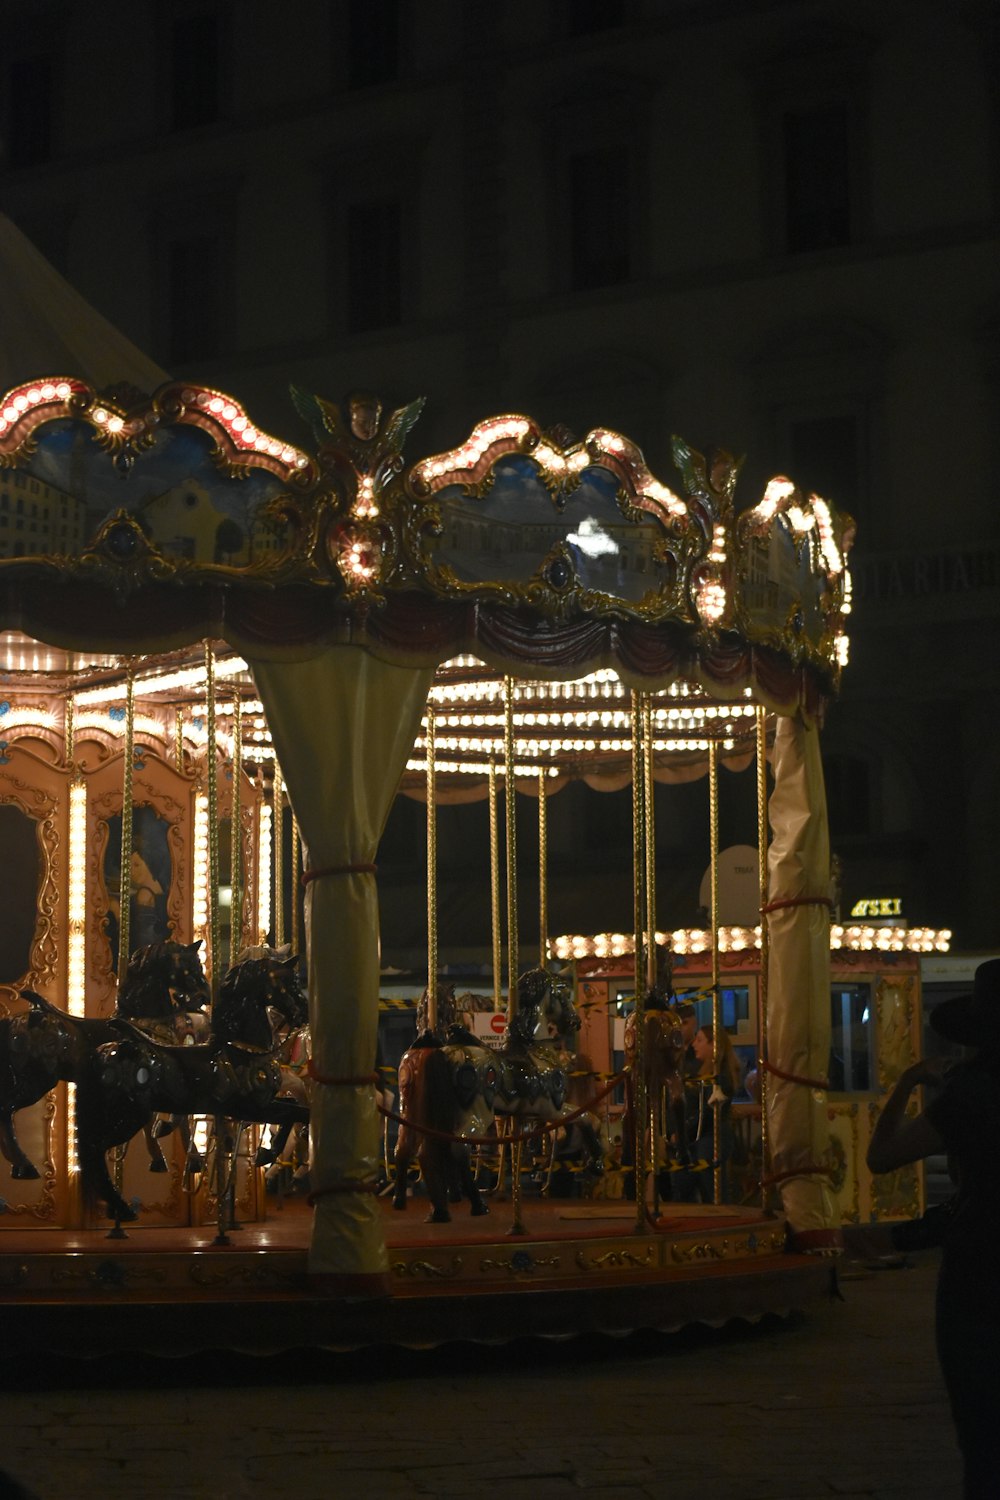 lighted carousel at nigh time